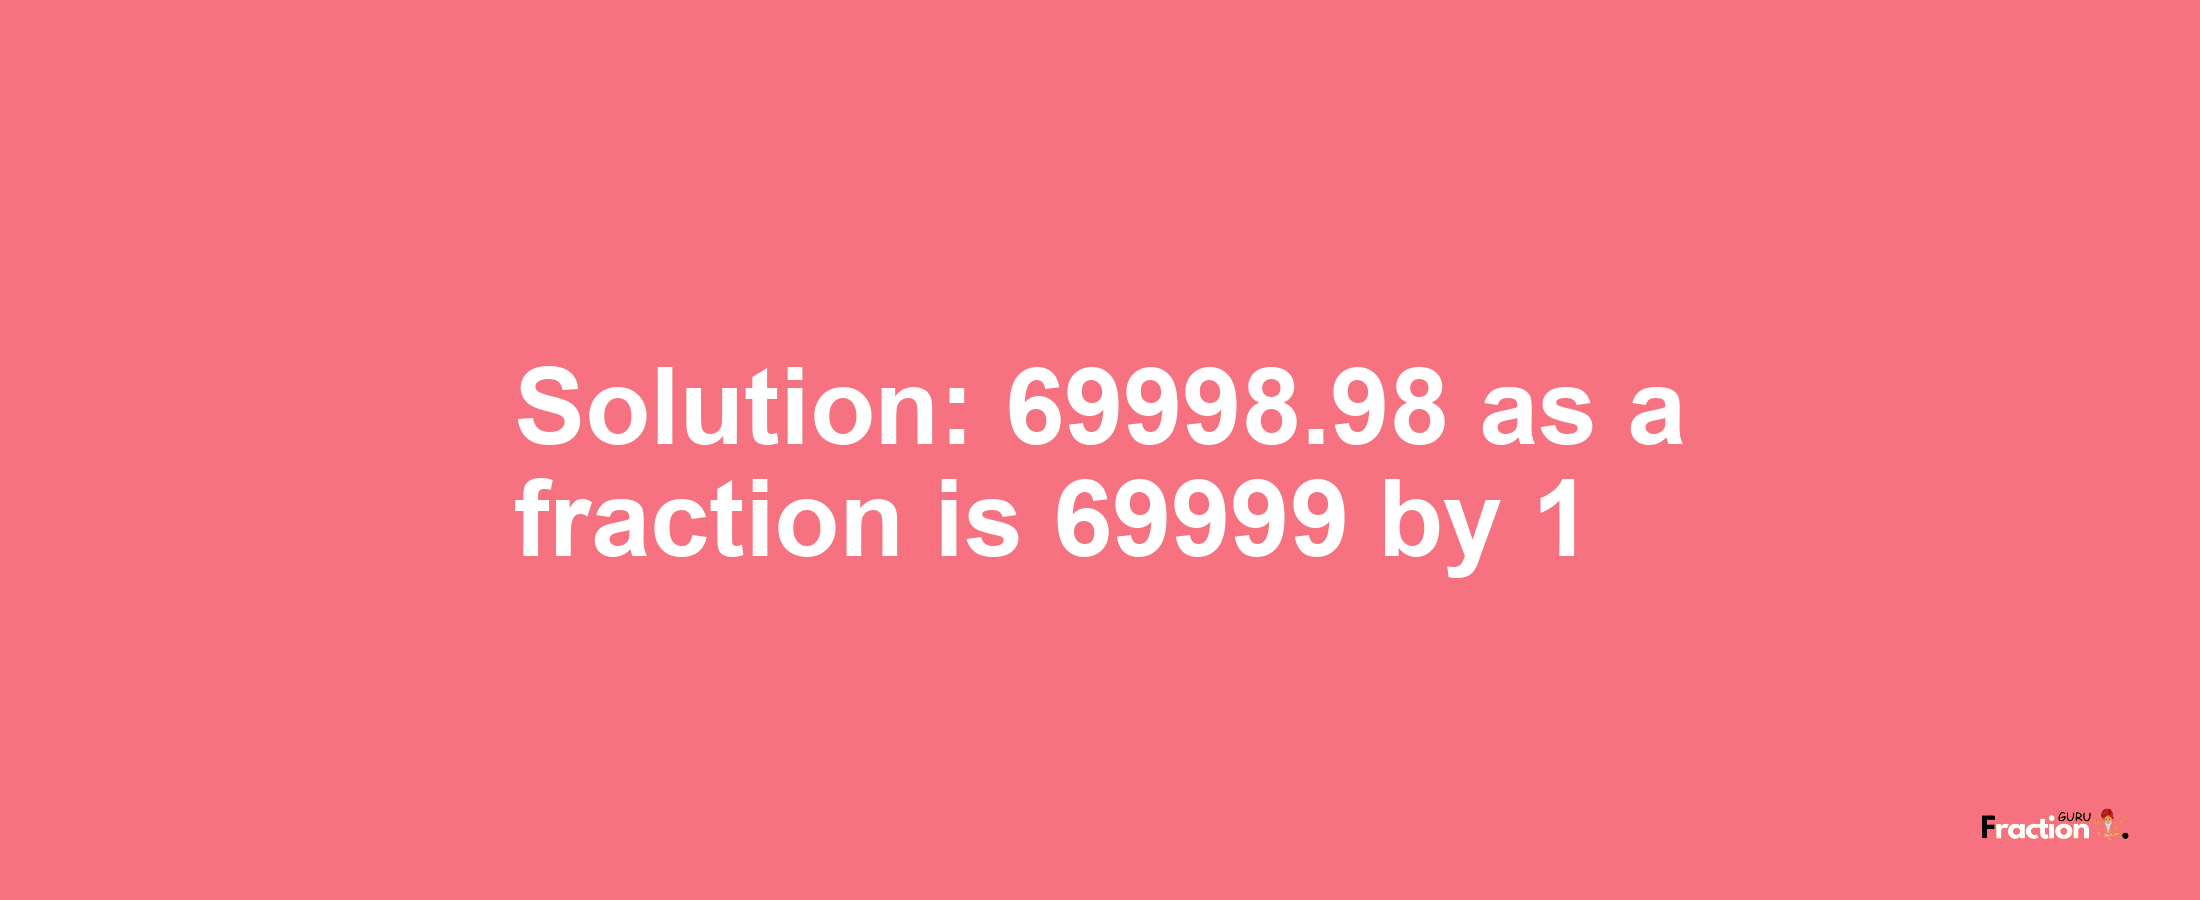 Solution:69998.98 as a fraction is 69999/1